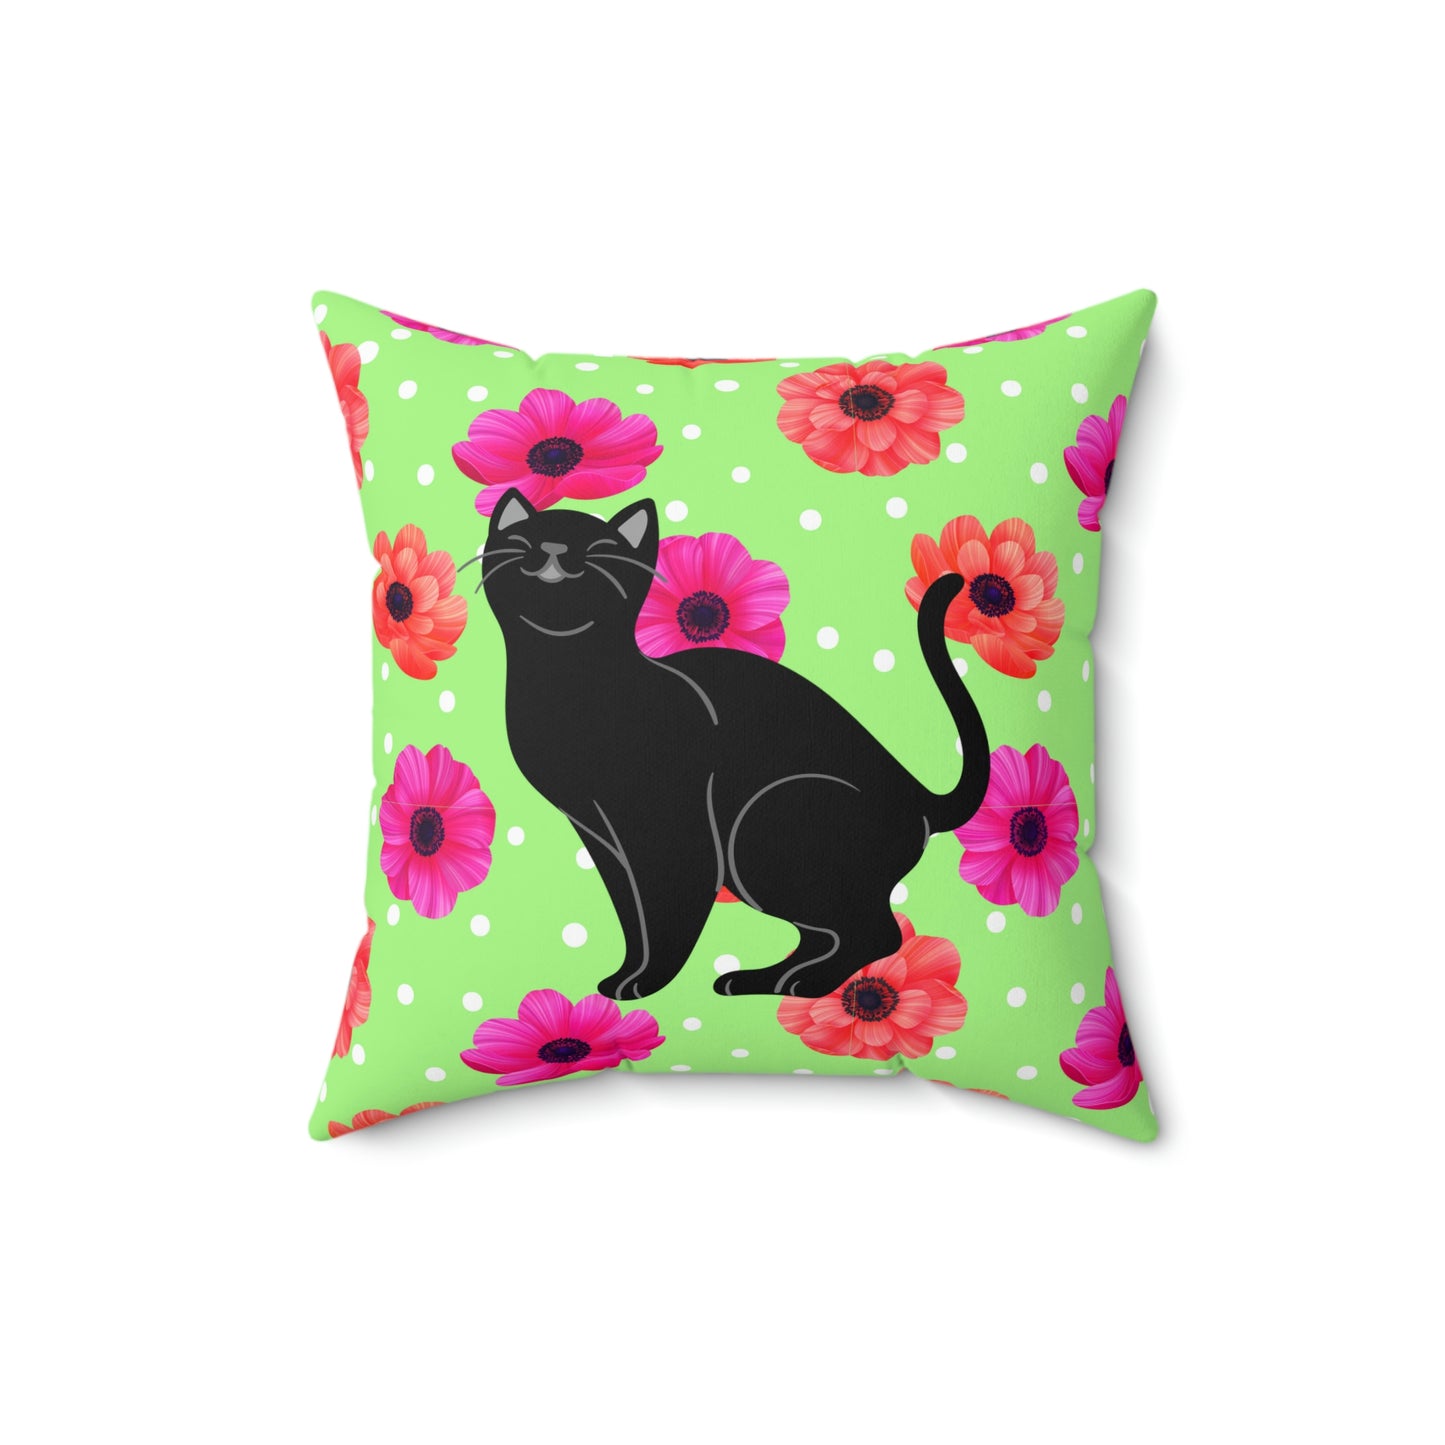 Floral Design with Black Cat Spun Polyester Square Indoor Pillow